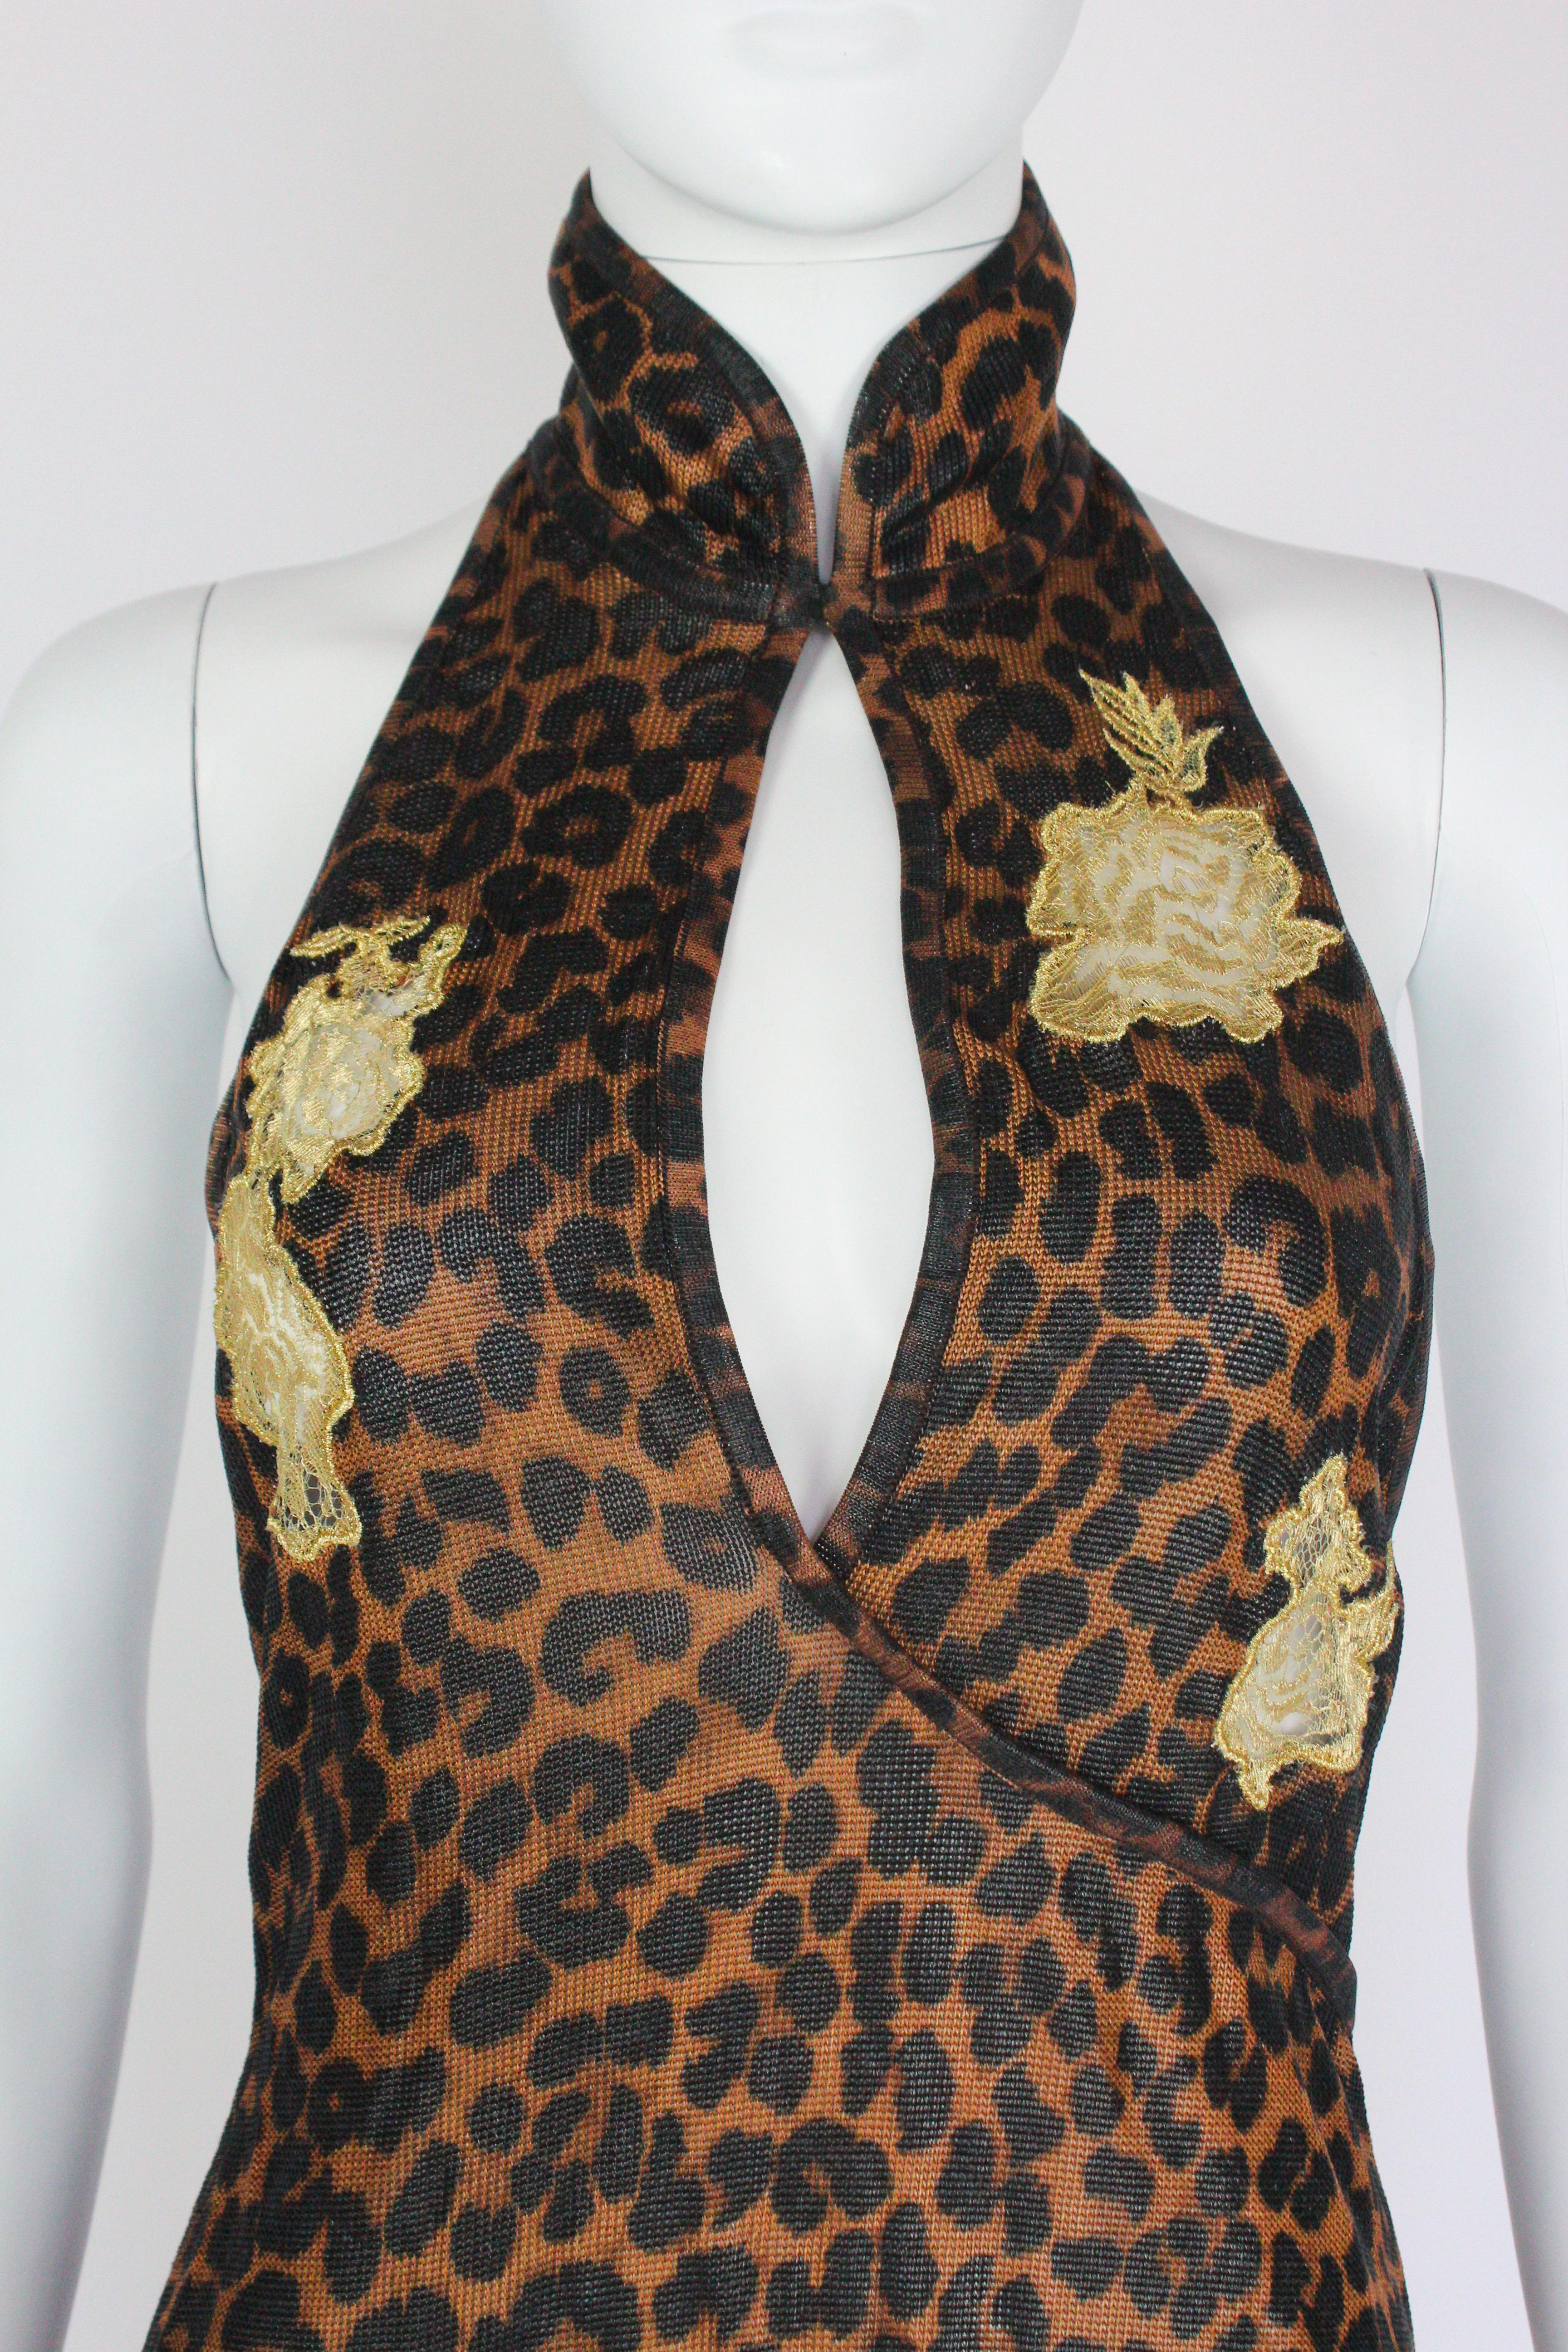 Christian Dior by John Galliano Leopard Dress F/W 2000 In Good Condition For Sale In Norwich, GB